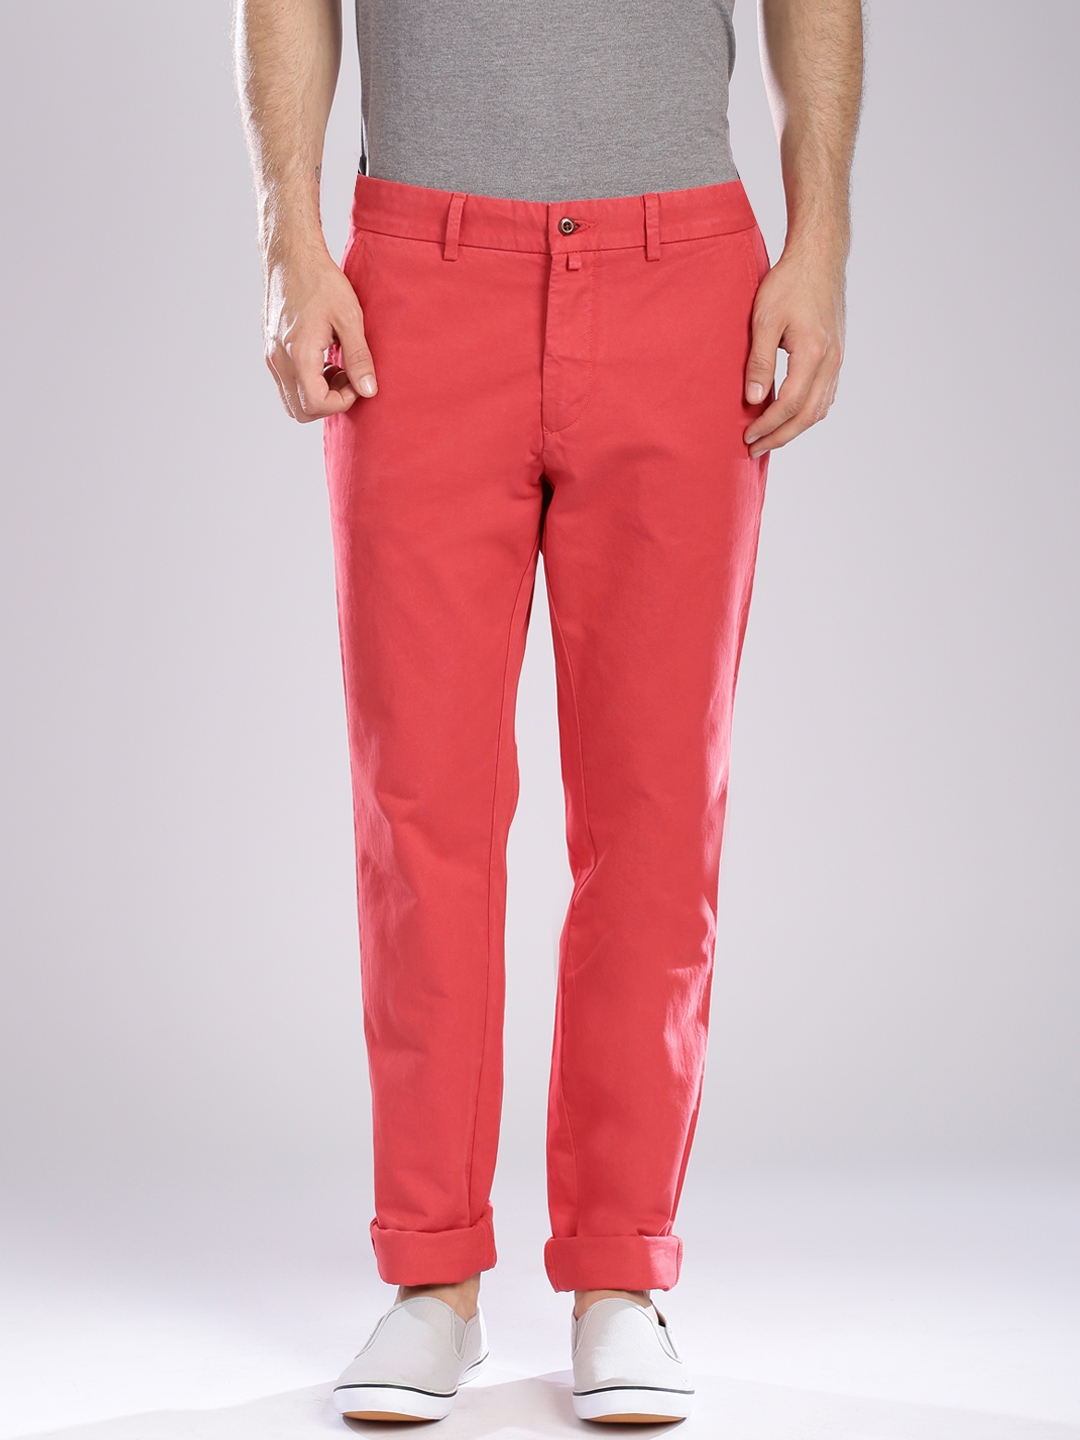 Buy GANT Coral Red Soho Fit Chino Trousers - Trousers for Men 1312063 ...